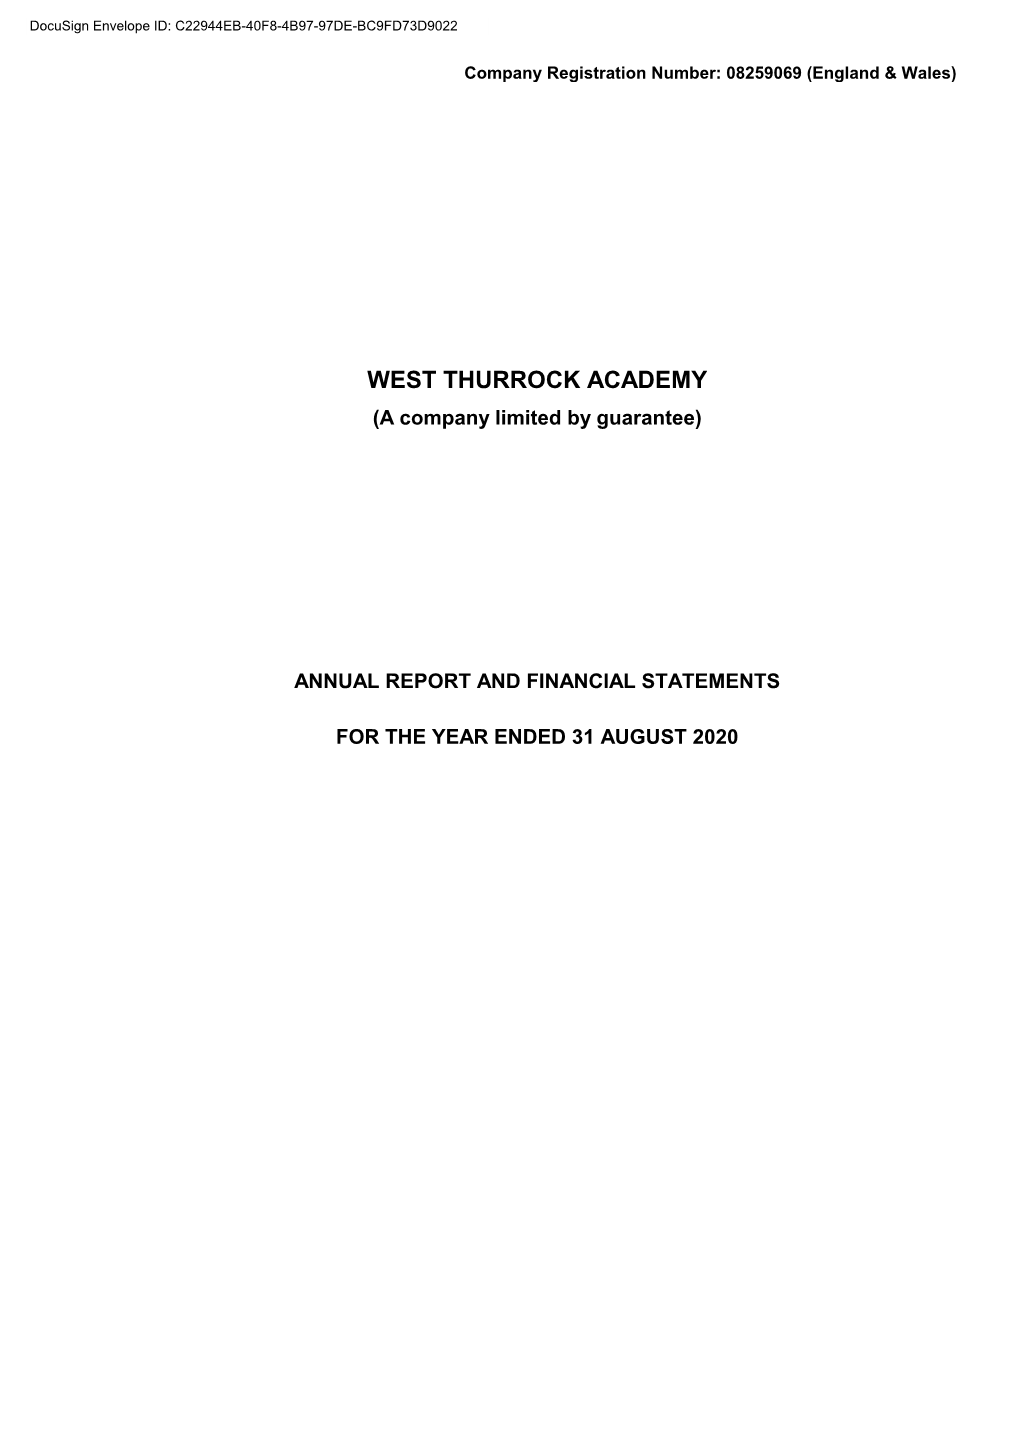 West Thurrock Academy Annual Report and Financial Statement